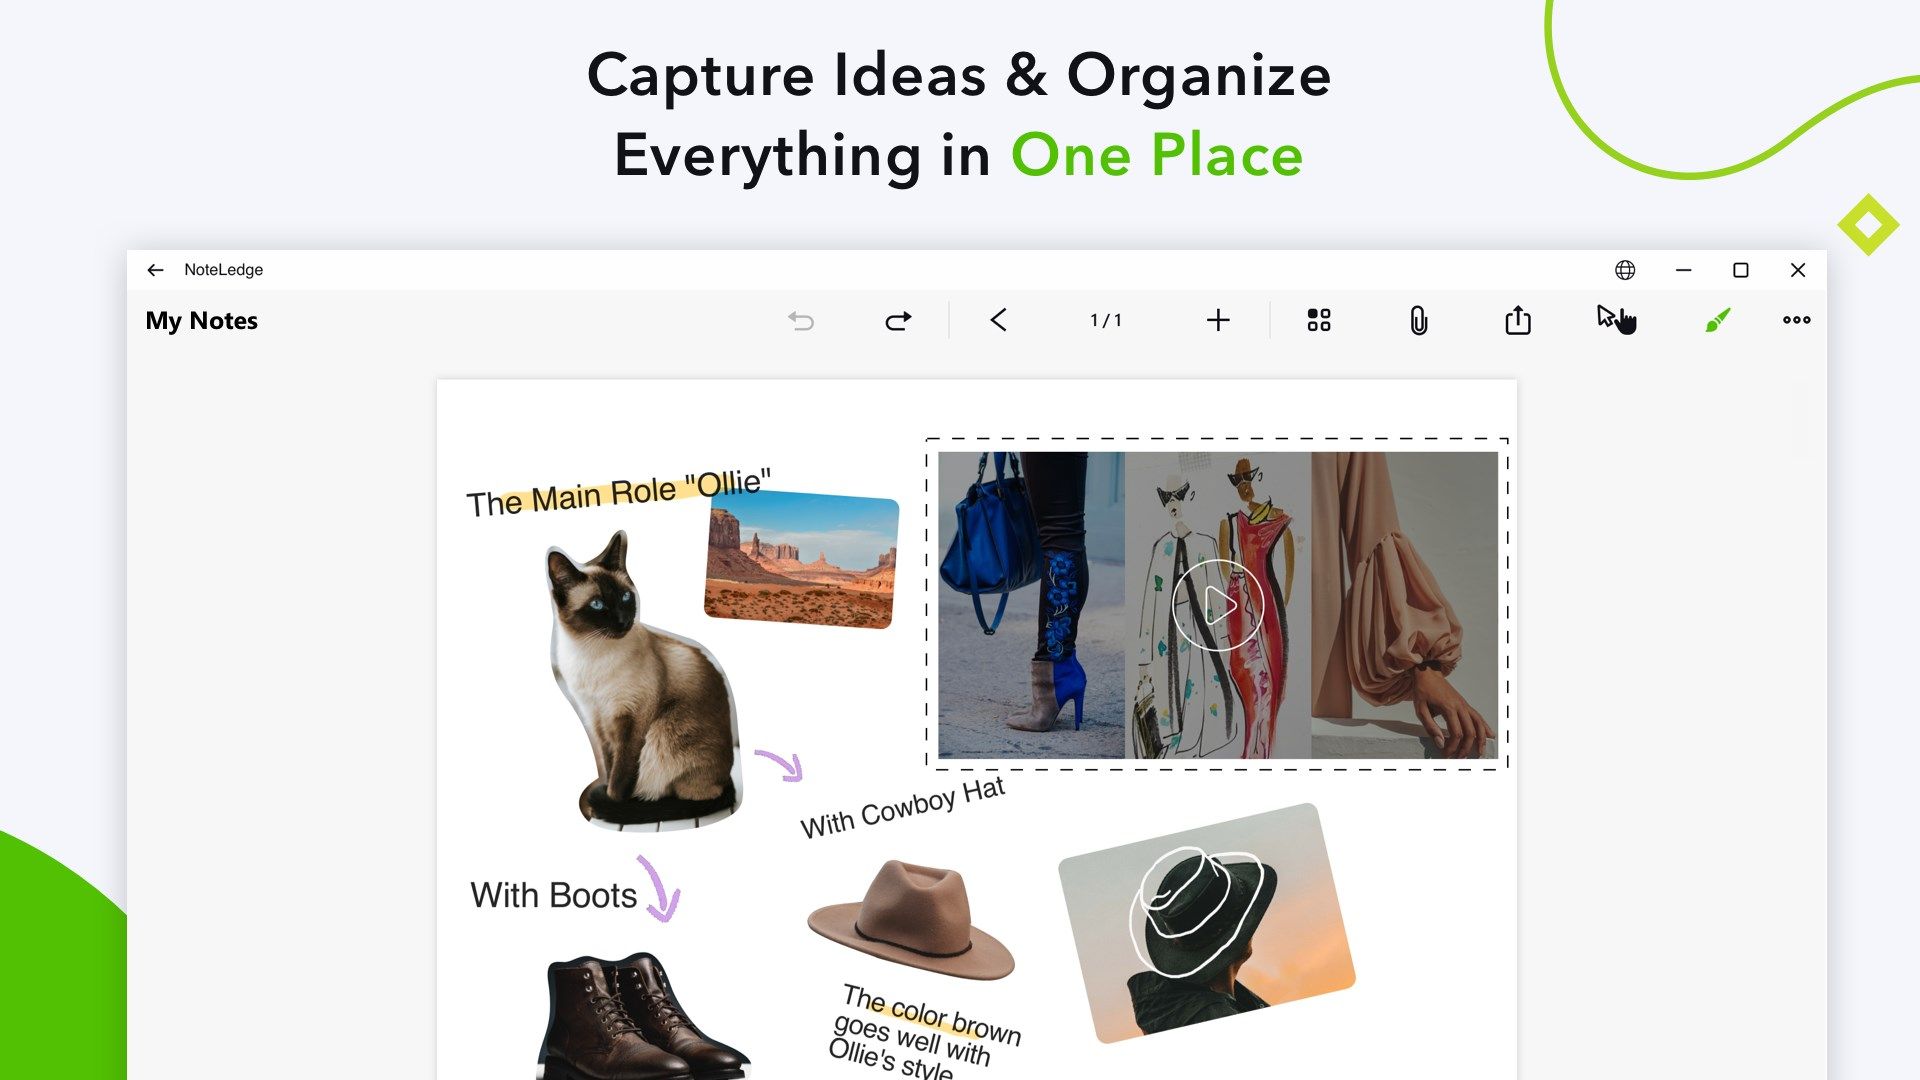 Capture Ideas & Organize Everything in One Place